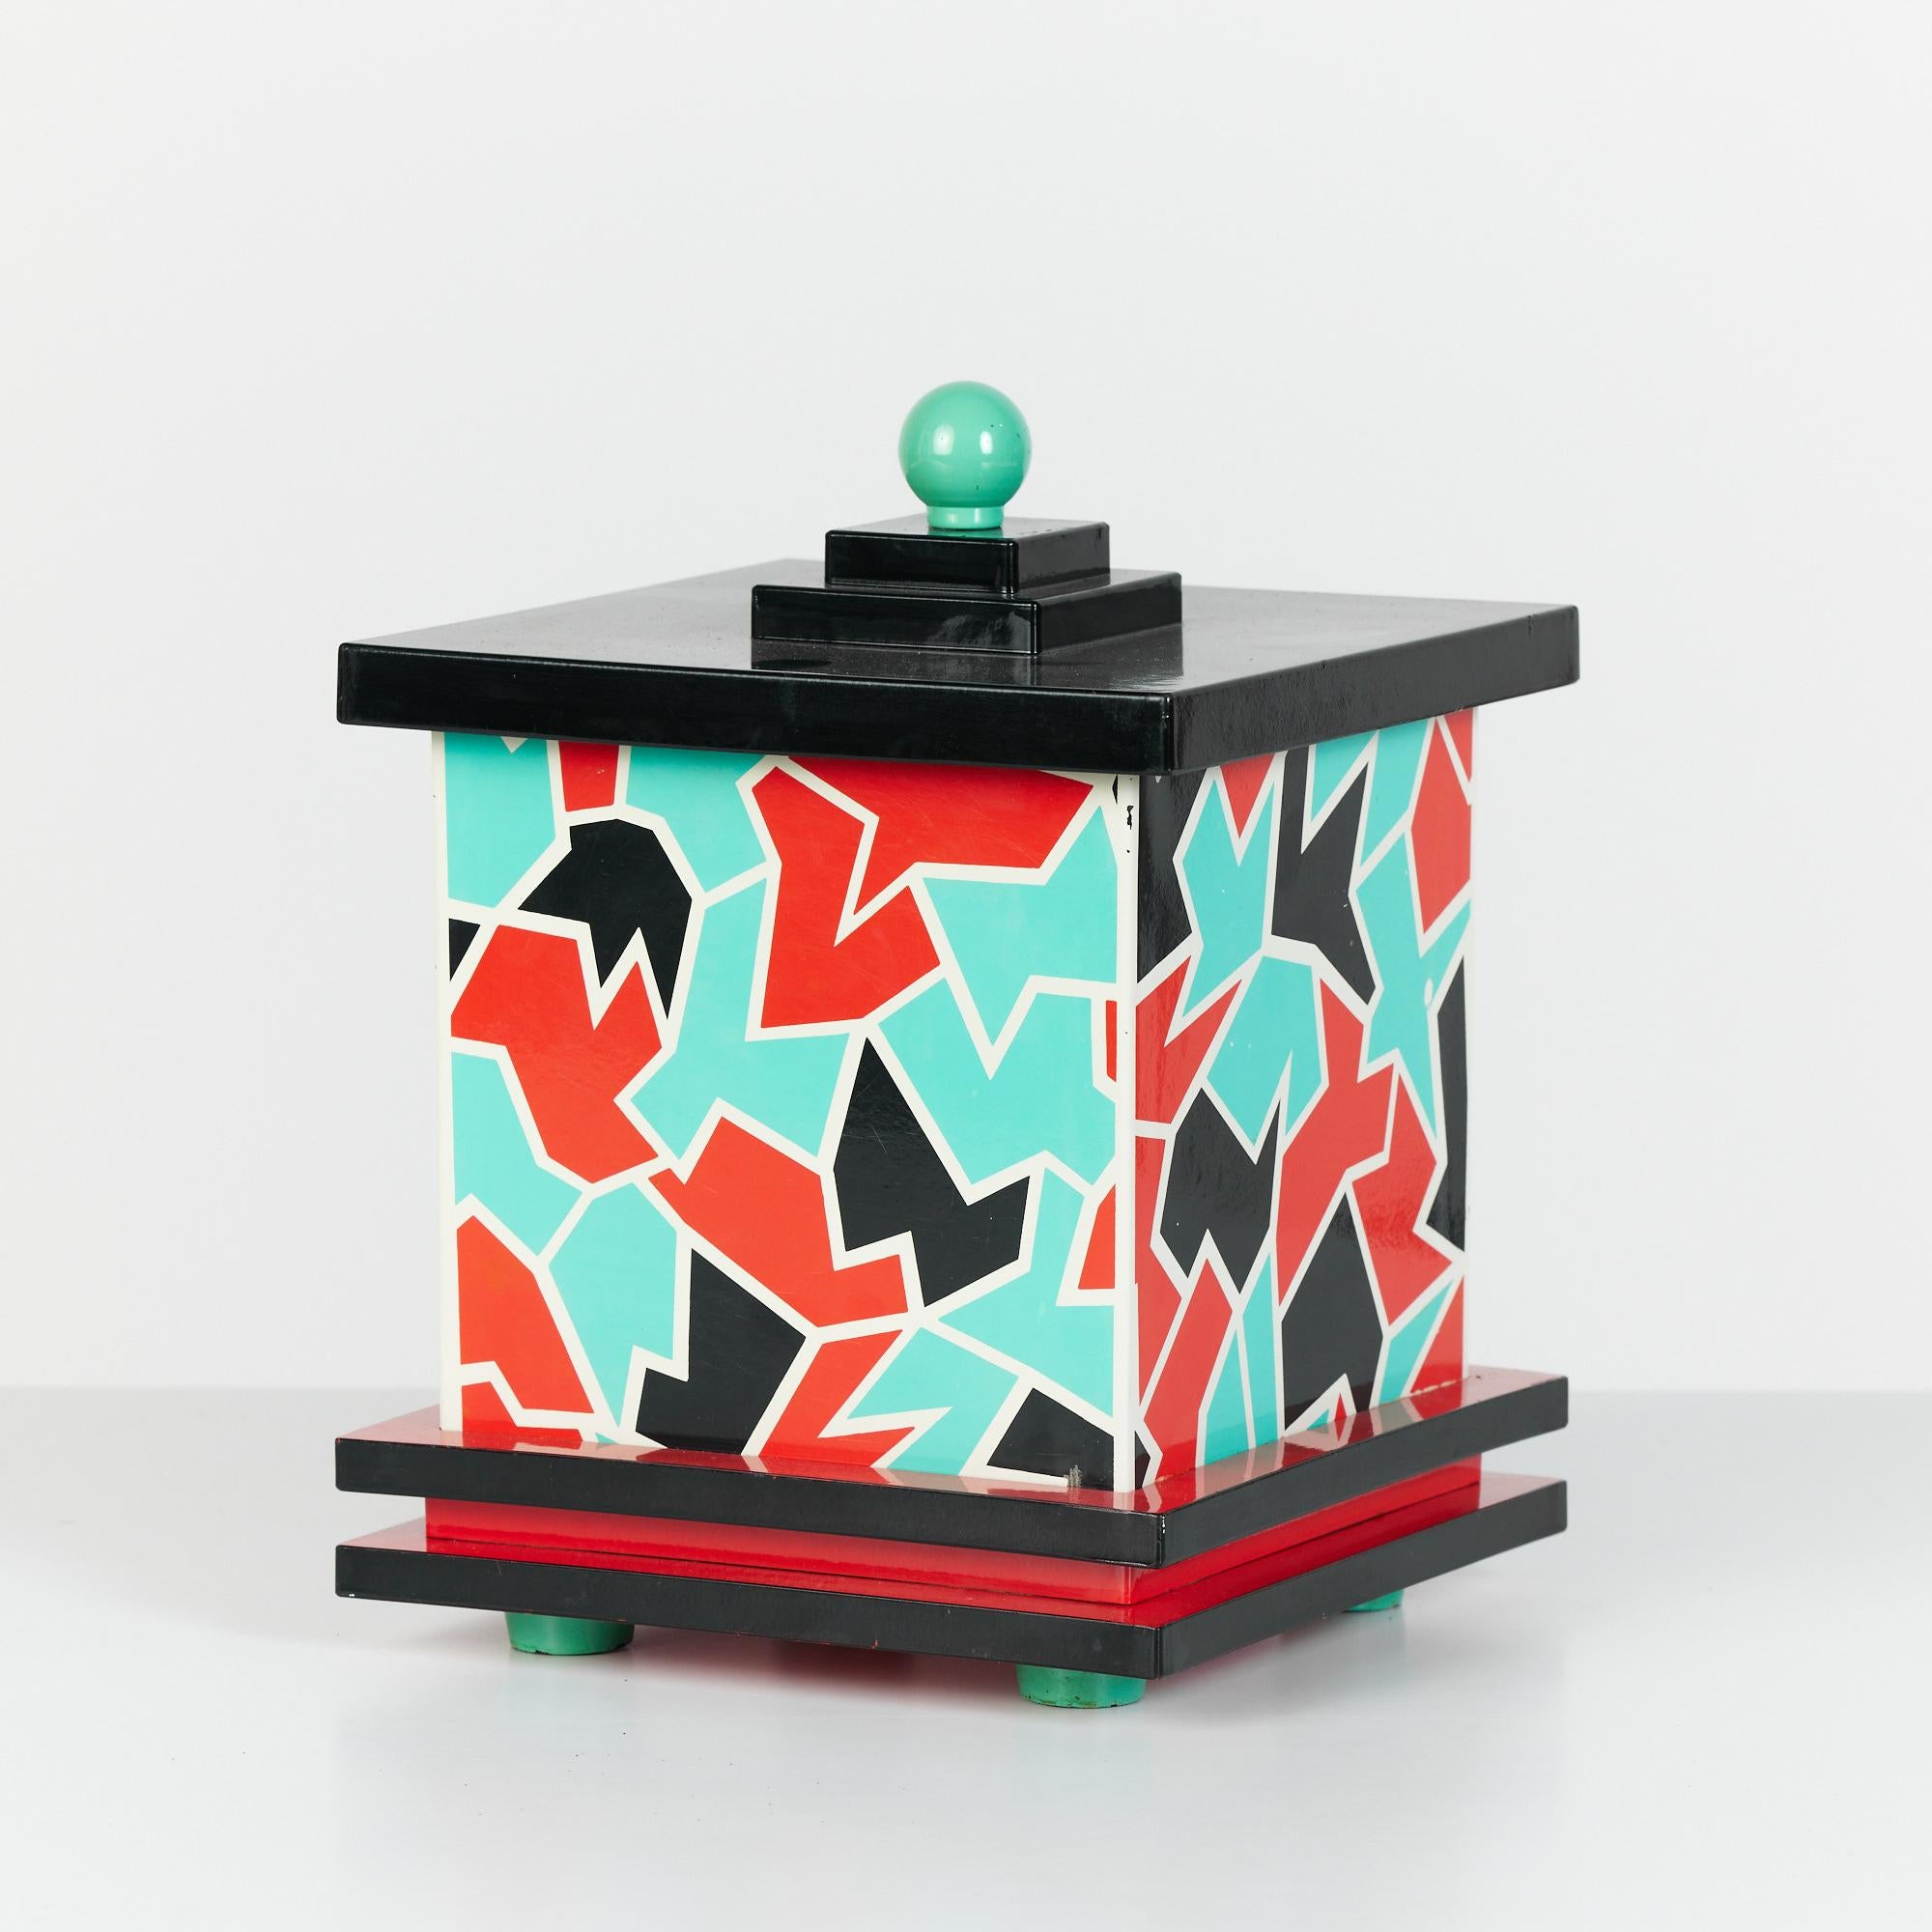 A lidded post modern Memphis ice bucket for Taste Seller, c.1980s, Japan. The bucket features and geometric black red and teal pattern with cream outlining. The black lid has three tiers and is finished with a teal globe pull. The base of bucket is